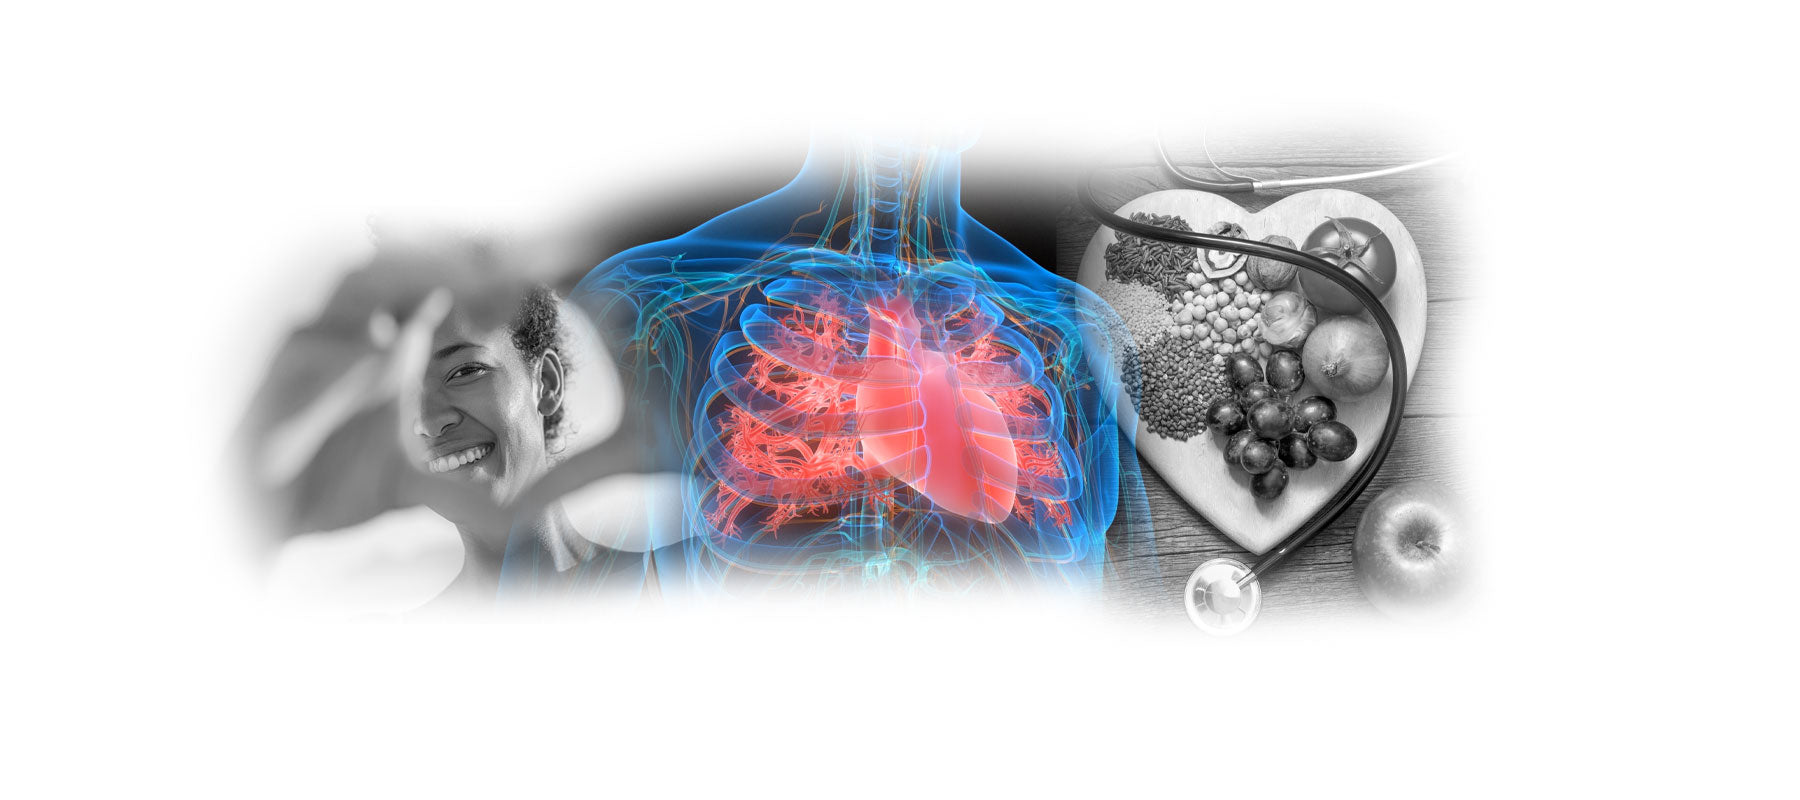 A composite image showing a happy person, a glowing heart illustration, and a heart-shaped bowl of fruits and grains, depicting a holistic heart health concept.